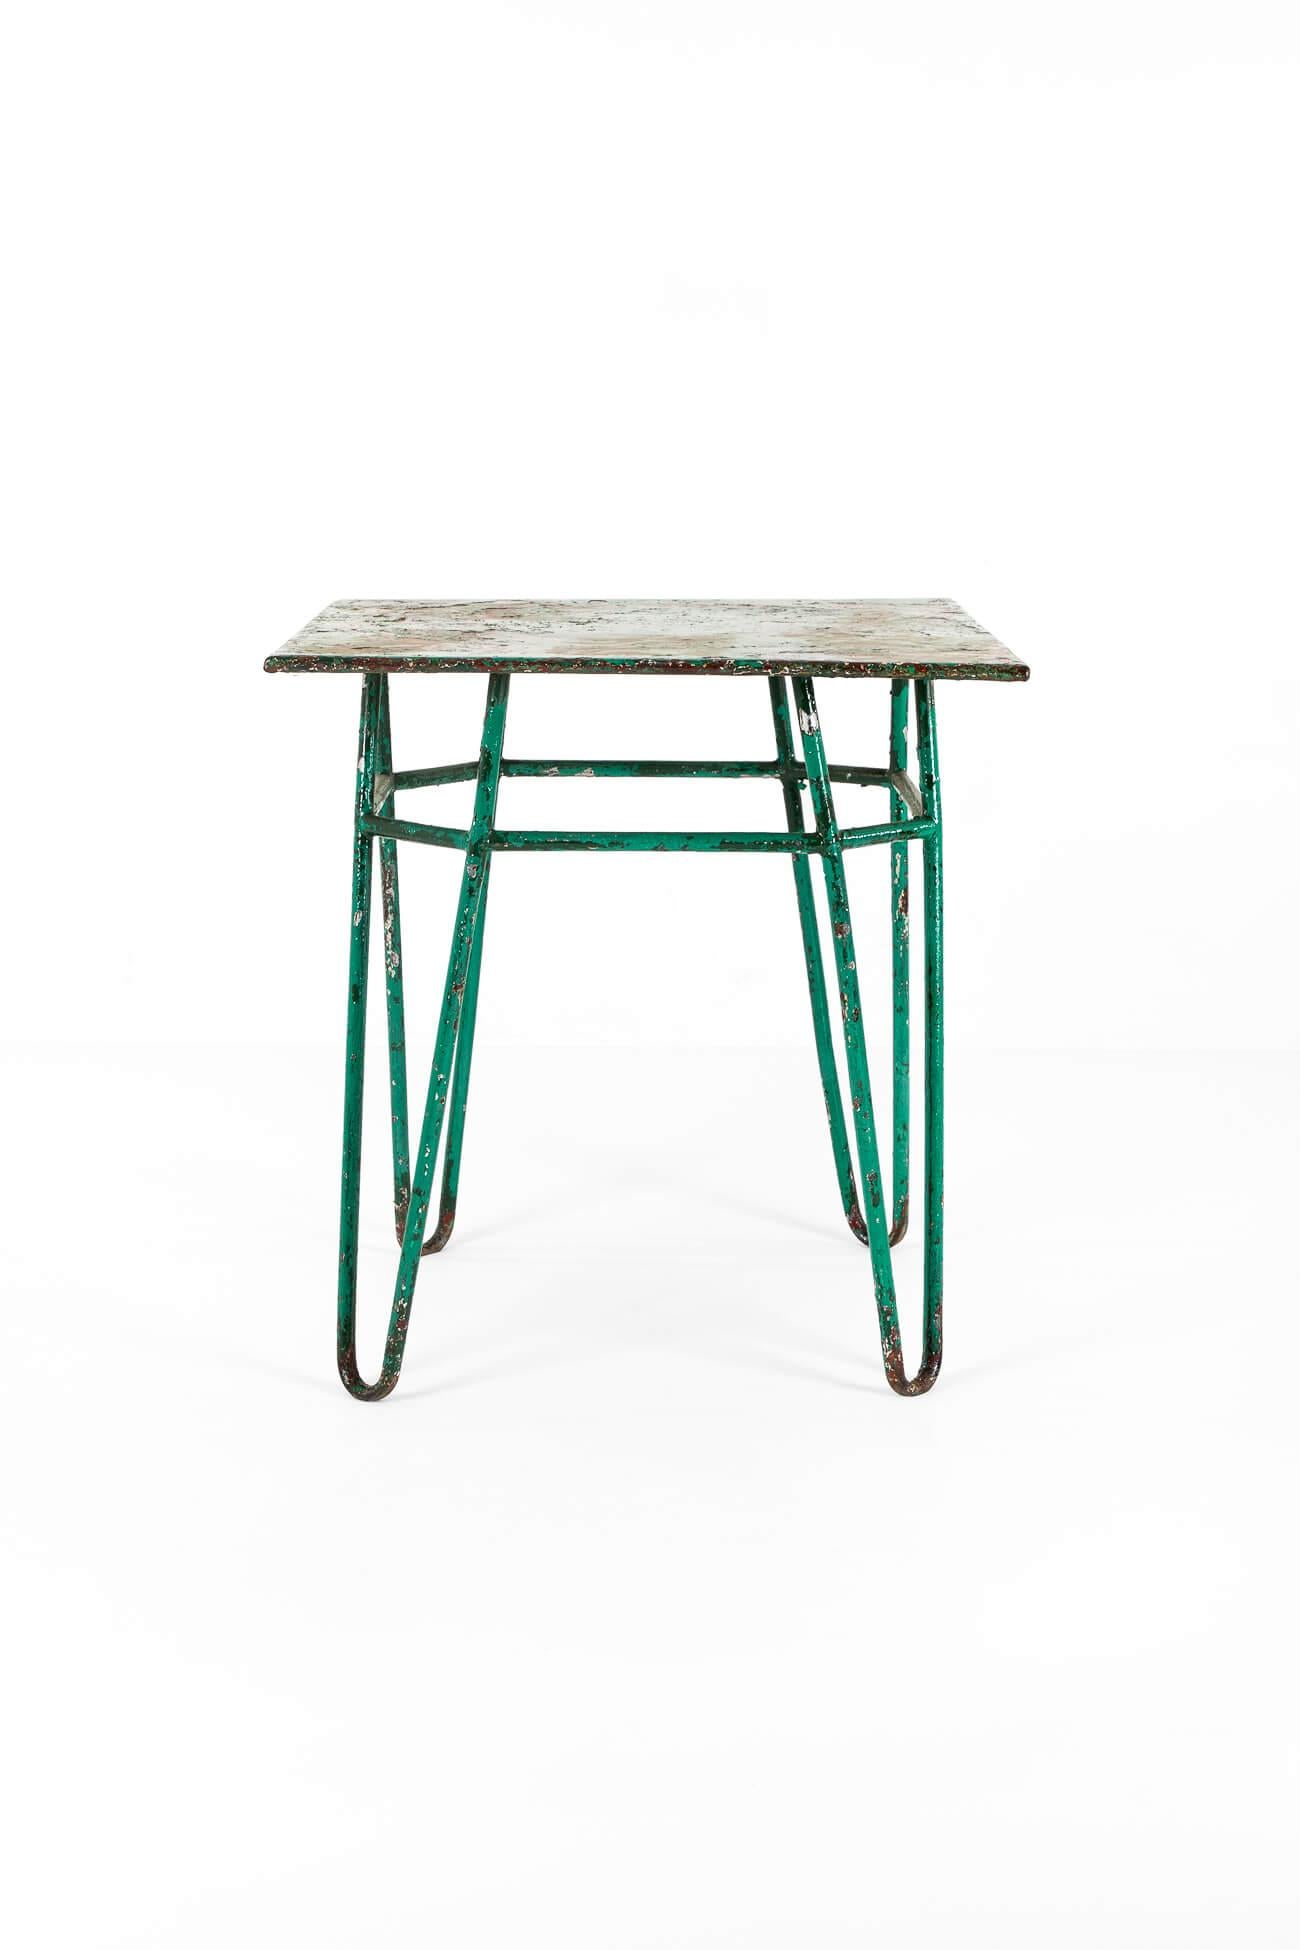 A fabulous continental tubular bistro table in original vibrant green paint.

The smooth square top rests on double tubular corner supports, with high stretchers beneath.

A superb item of original design, perfect for both home and garden